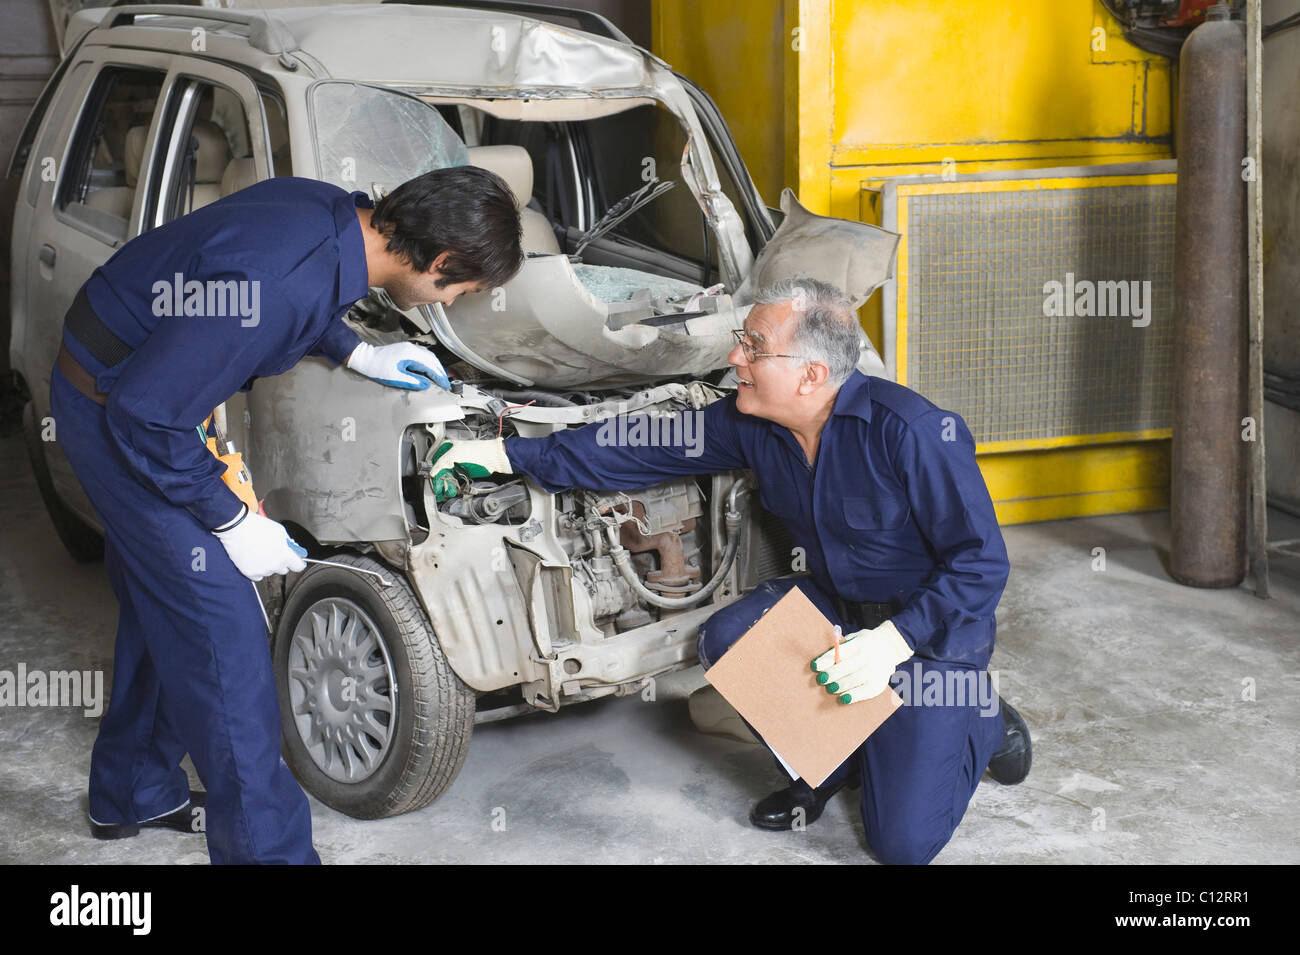 Auto mechanic with an apprentice repairing a car in a garage Stock Photo